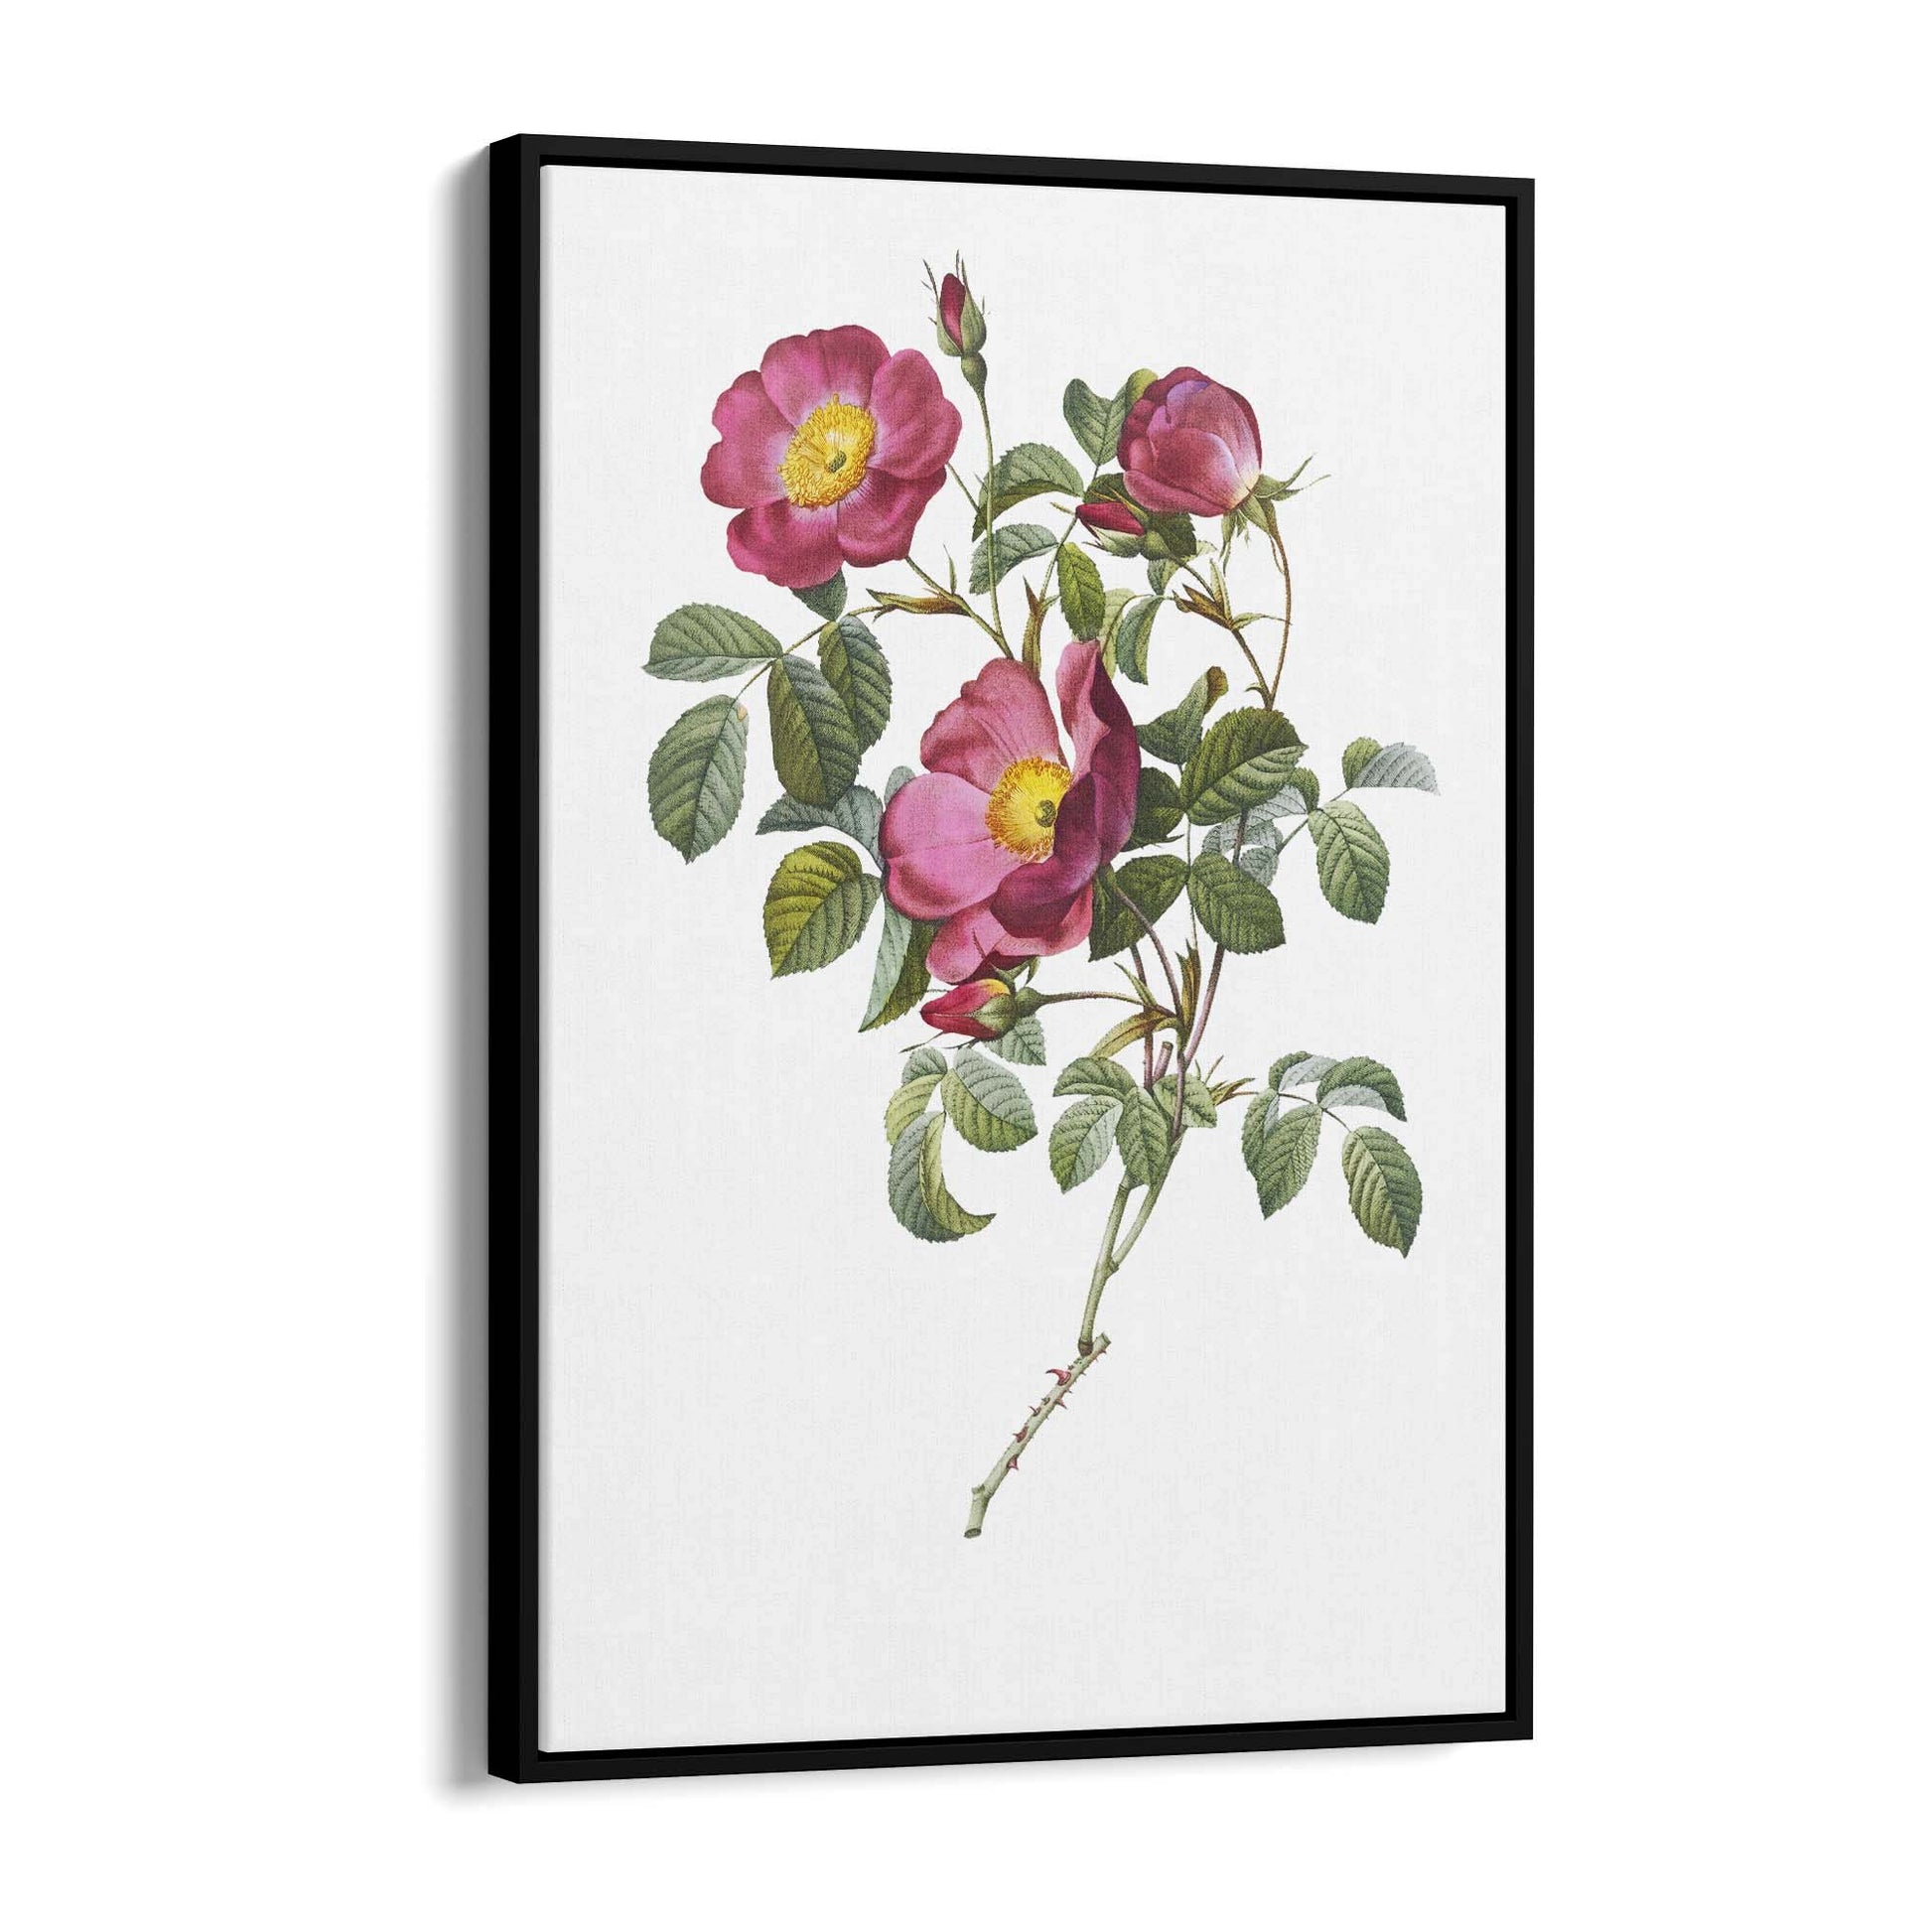 Flower Botanical Painting Kitchen Hallway Wall Art #41 - The Affordable Art Company